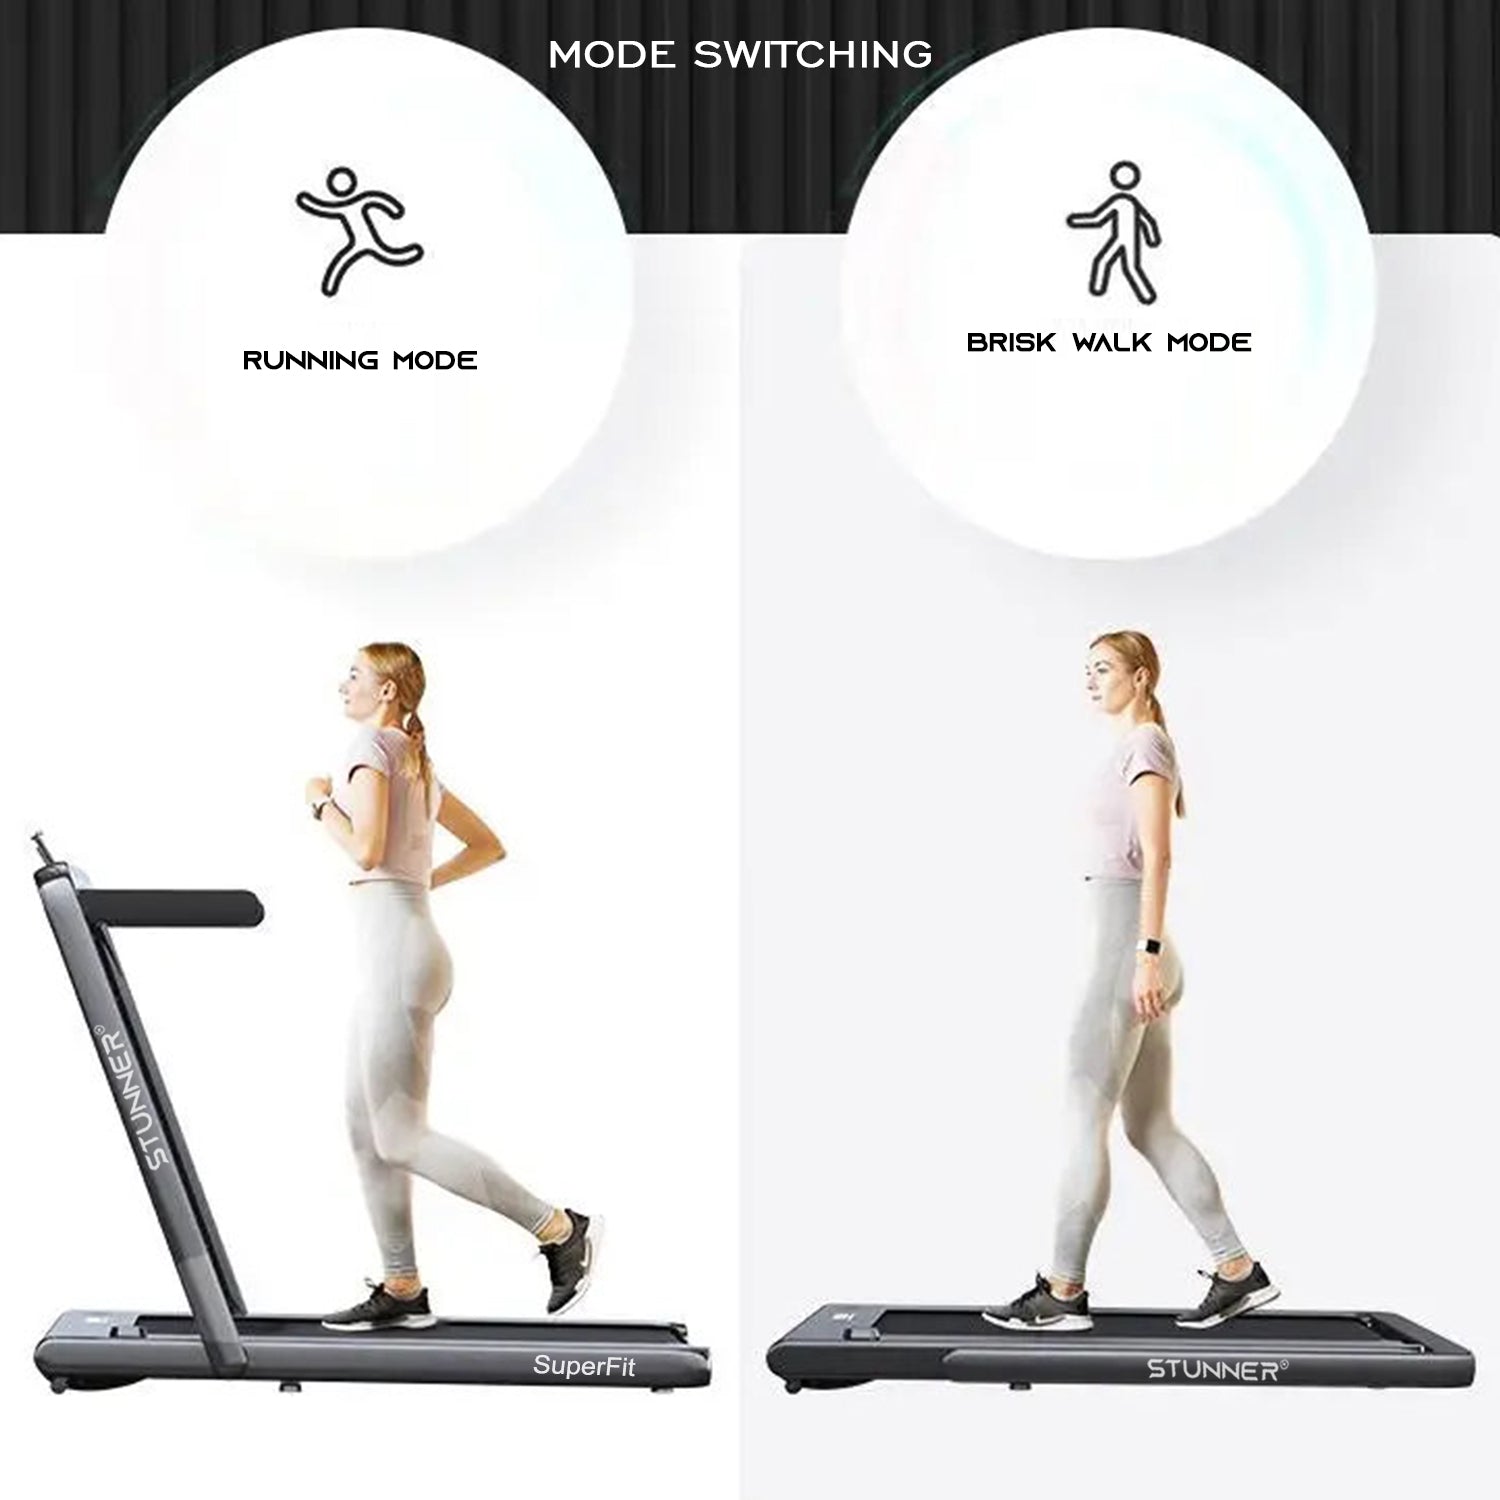 Stunner Fitness Superfit 2.25HP (4.0HP Peak) 2 in 1 Motorised Treadmill, MP3, Smart Phone App,for Cardio Workout at Home